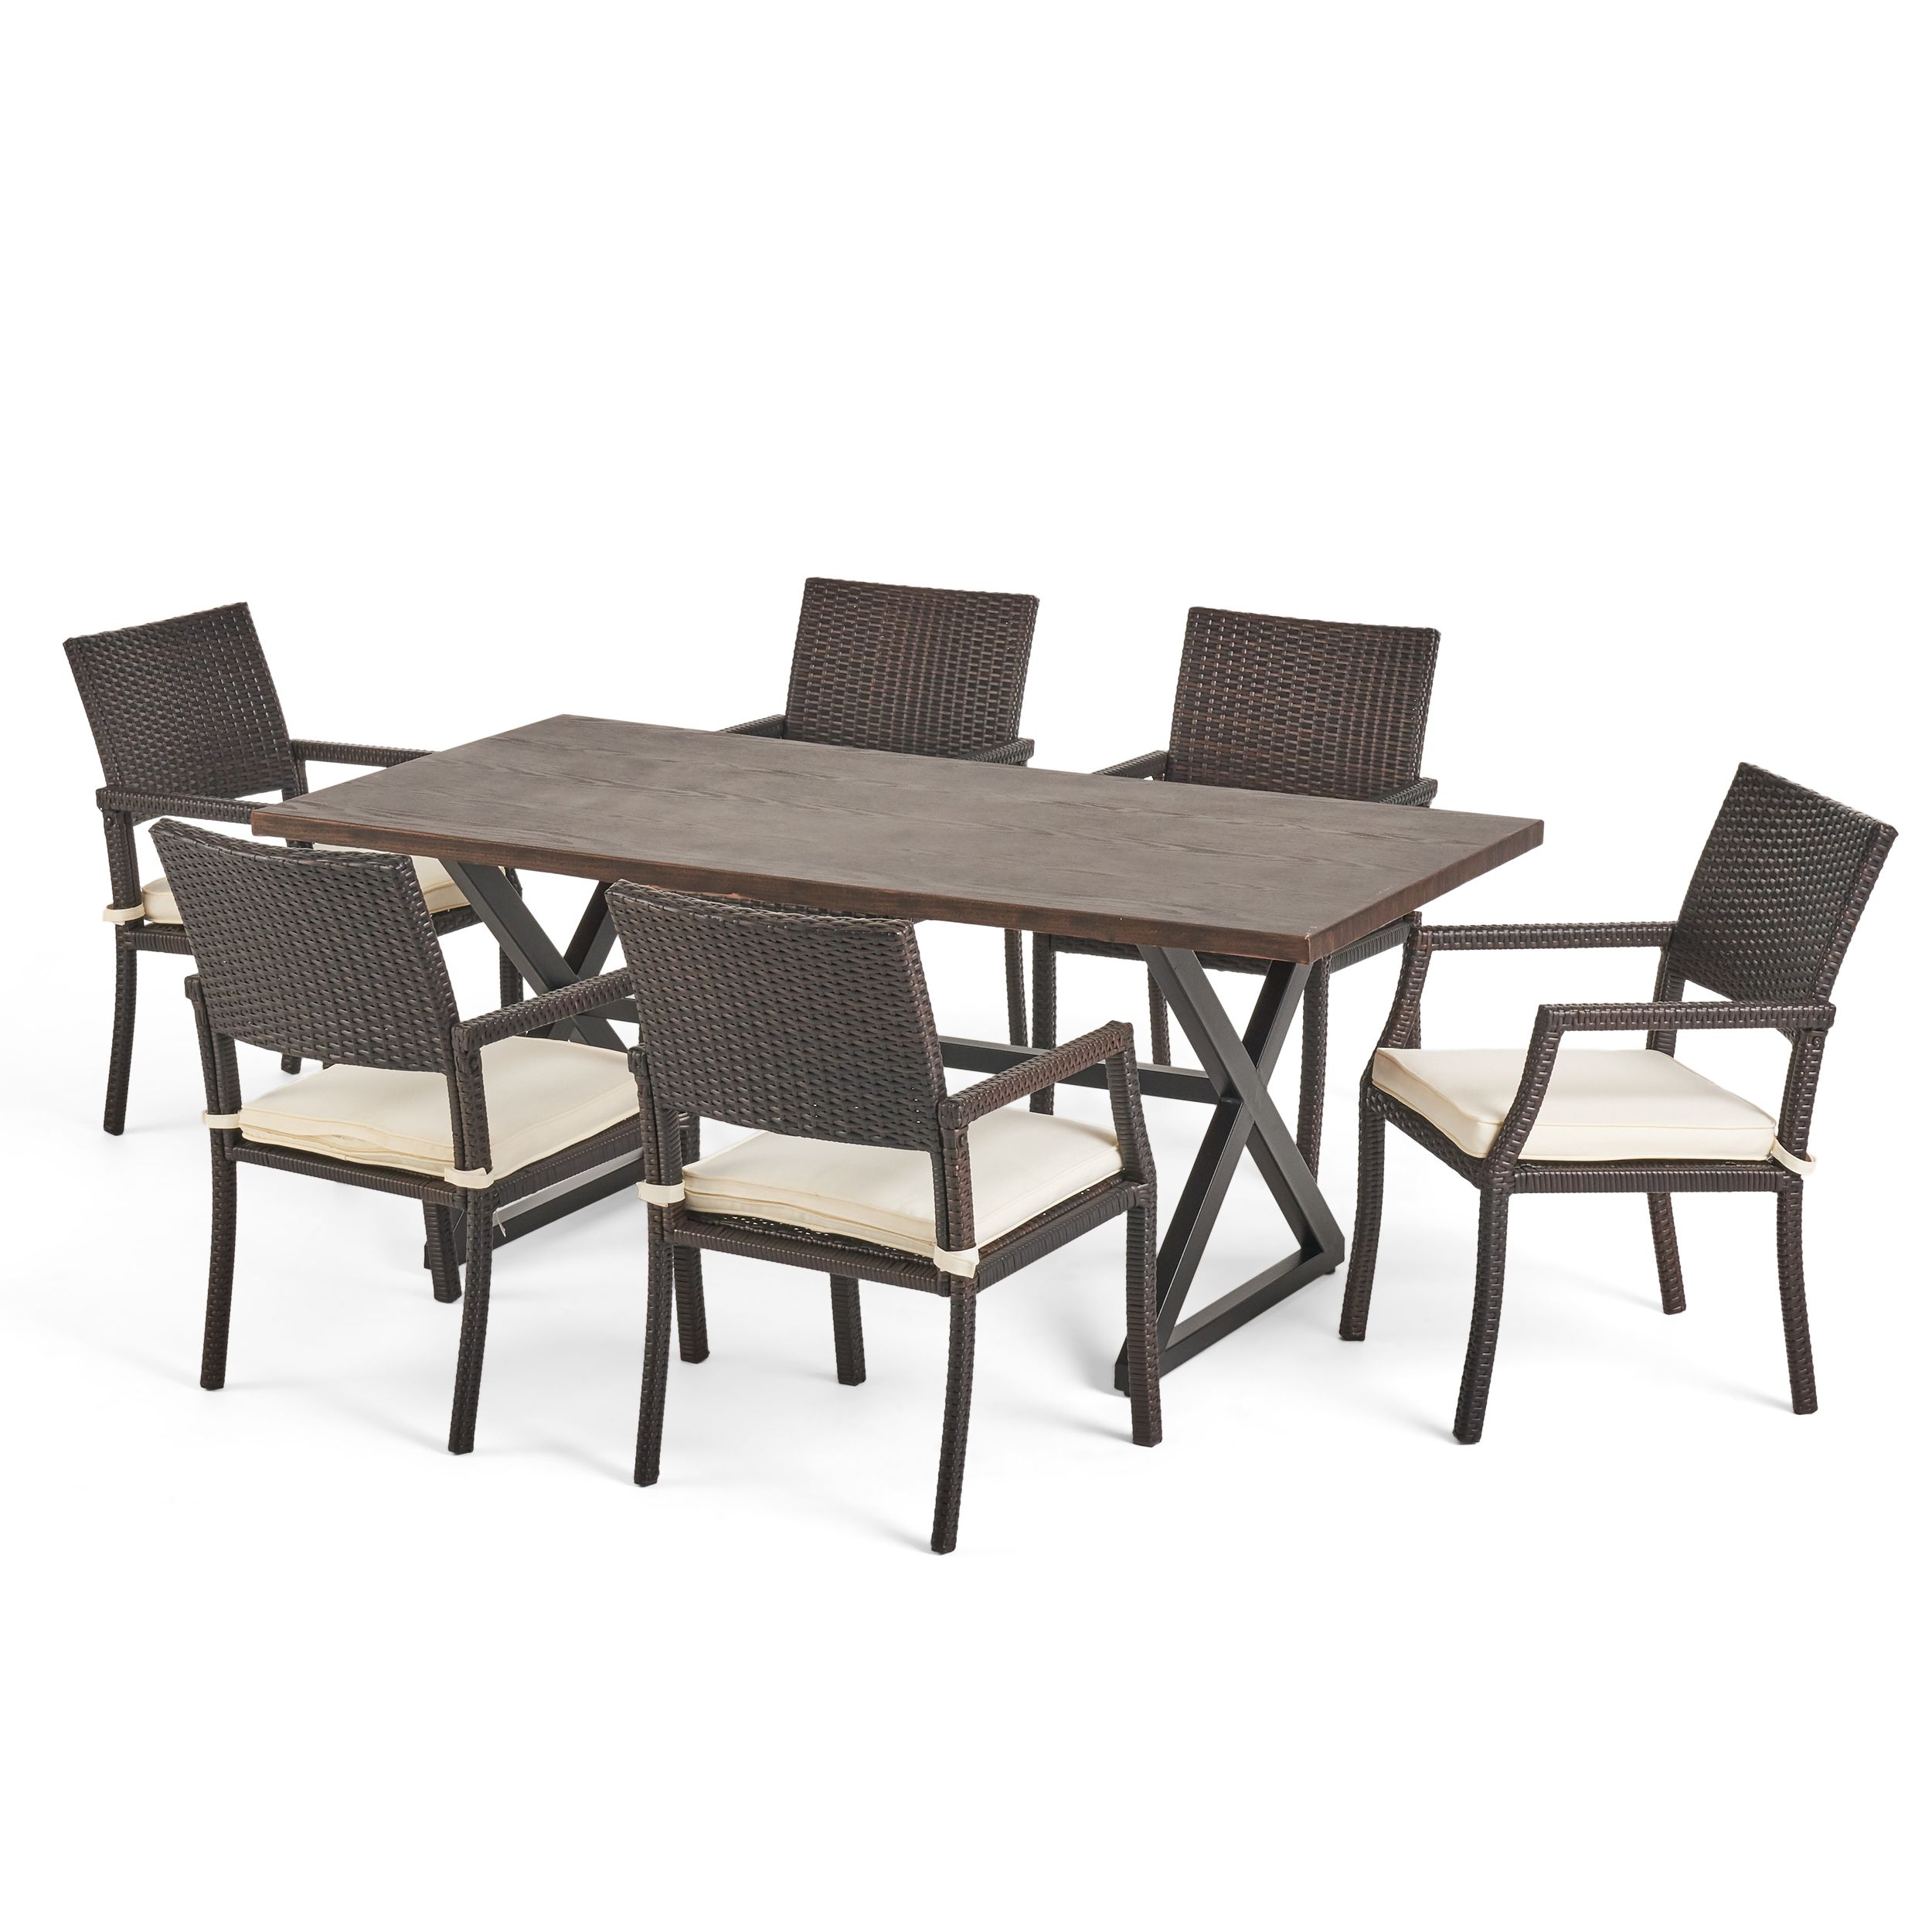 Outdoor 7 Piece Aluminum Dining Set With Wicker Dining Chairs And Regarding Famous White Outdoor Patio Dining Sets (View 15 of 15)